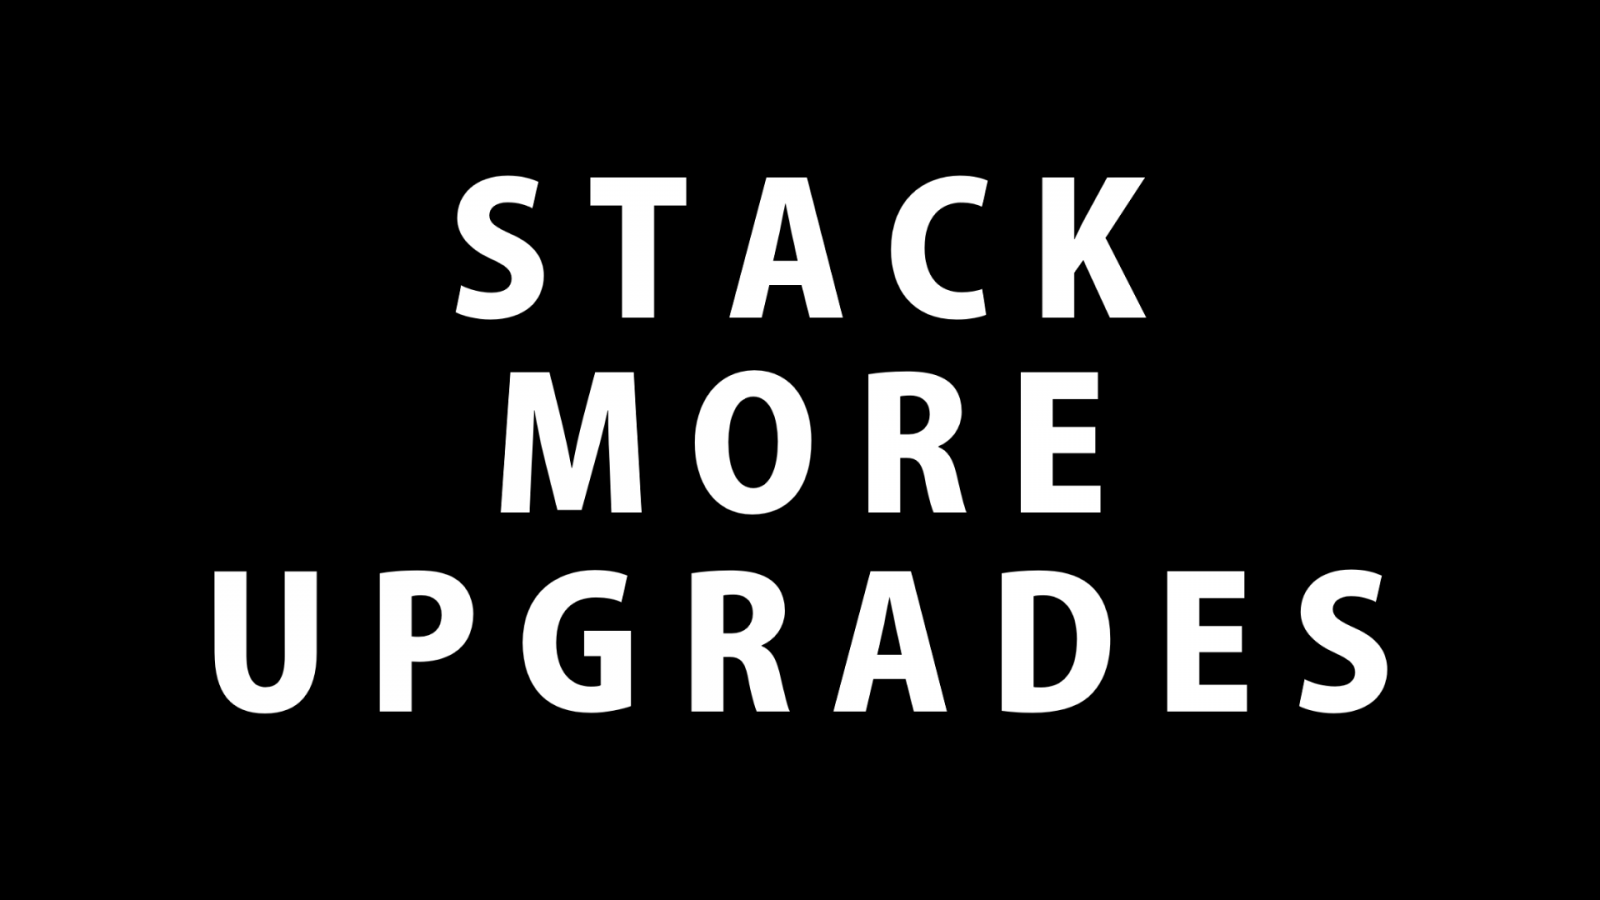 Stack 1 / 2 / 3 more upgrade modules